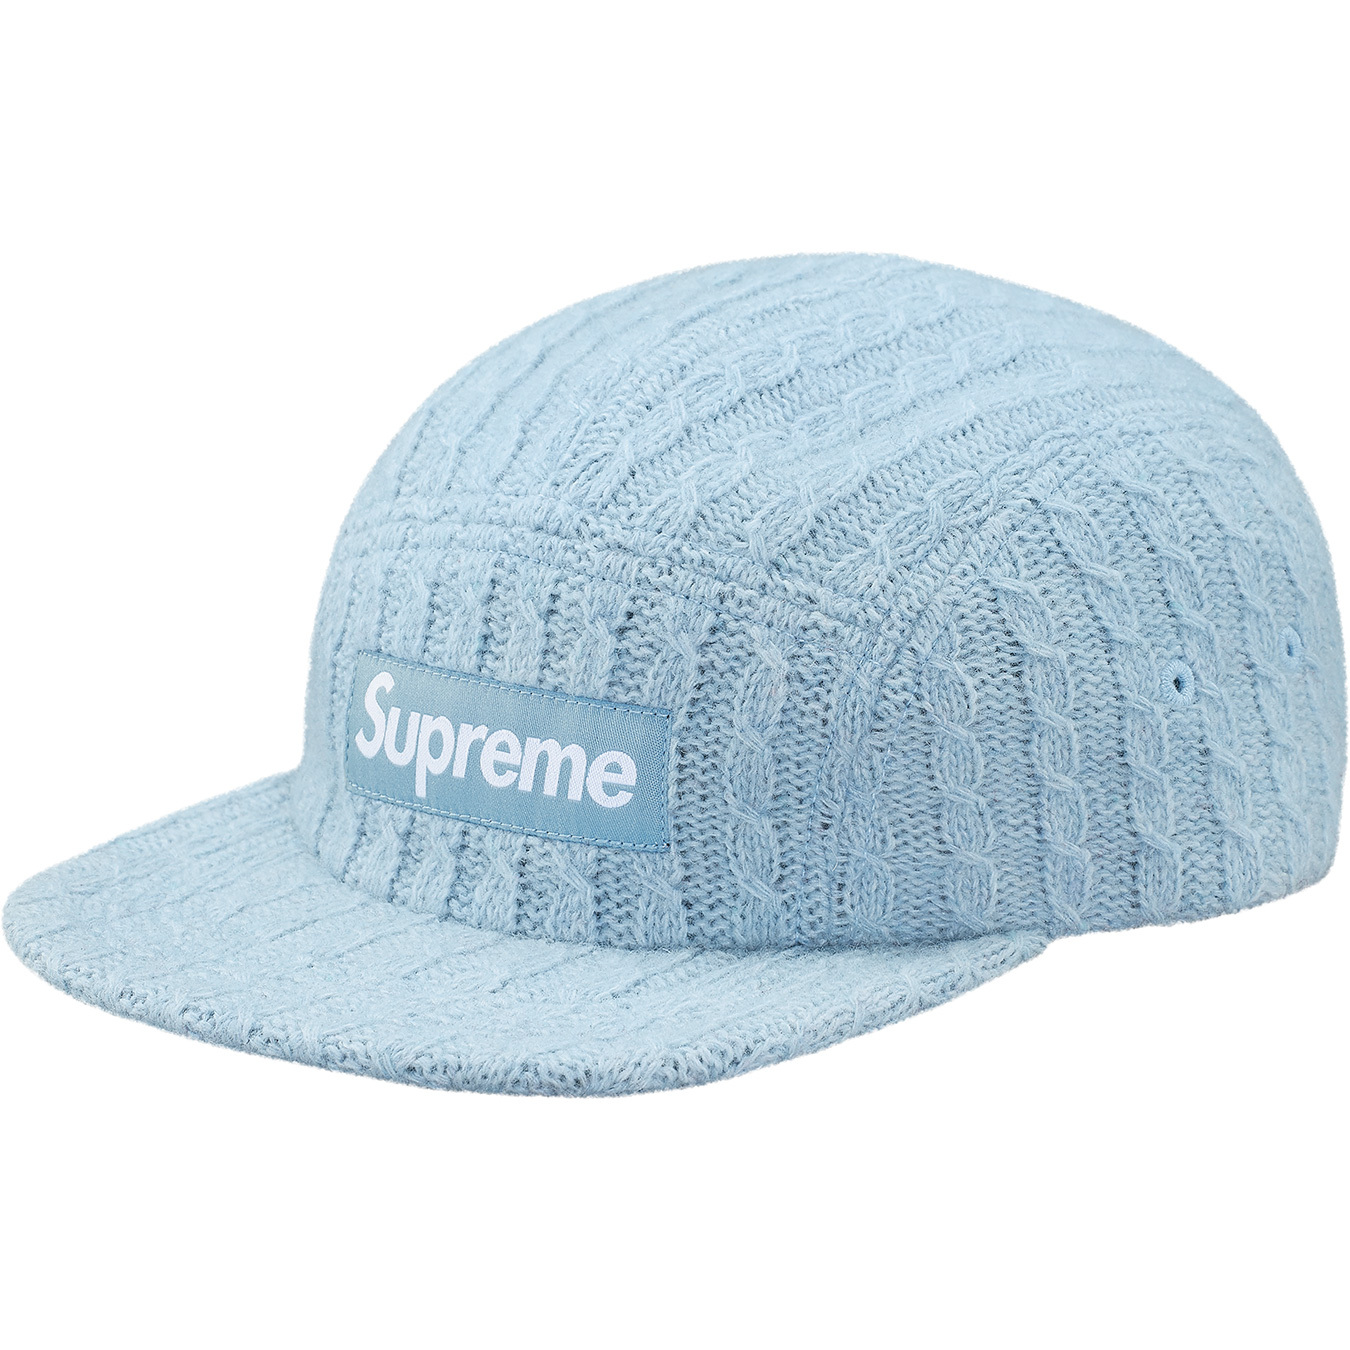 Supreme Fitted Cable Knit Camp Cap Light Blue - FW17 - US